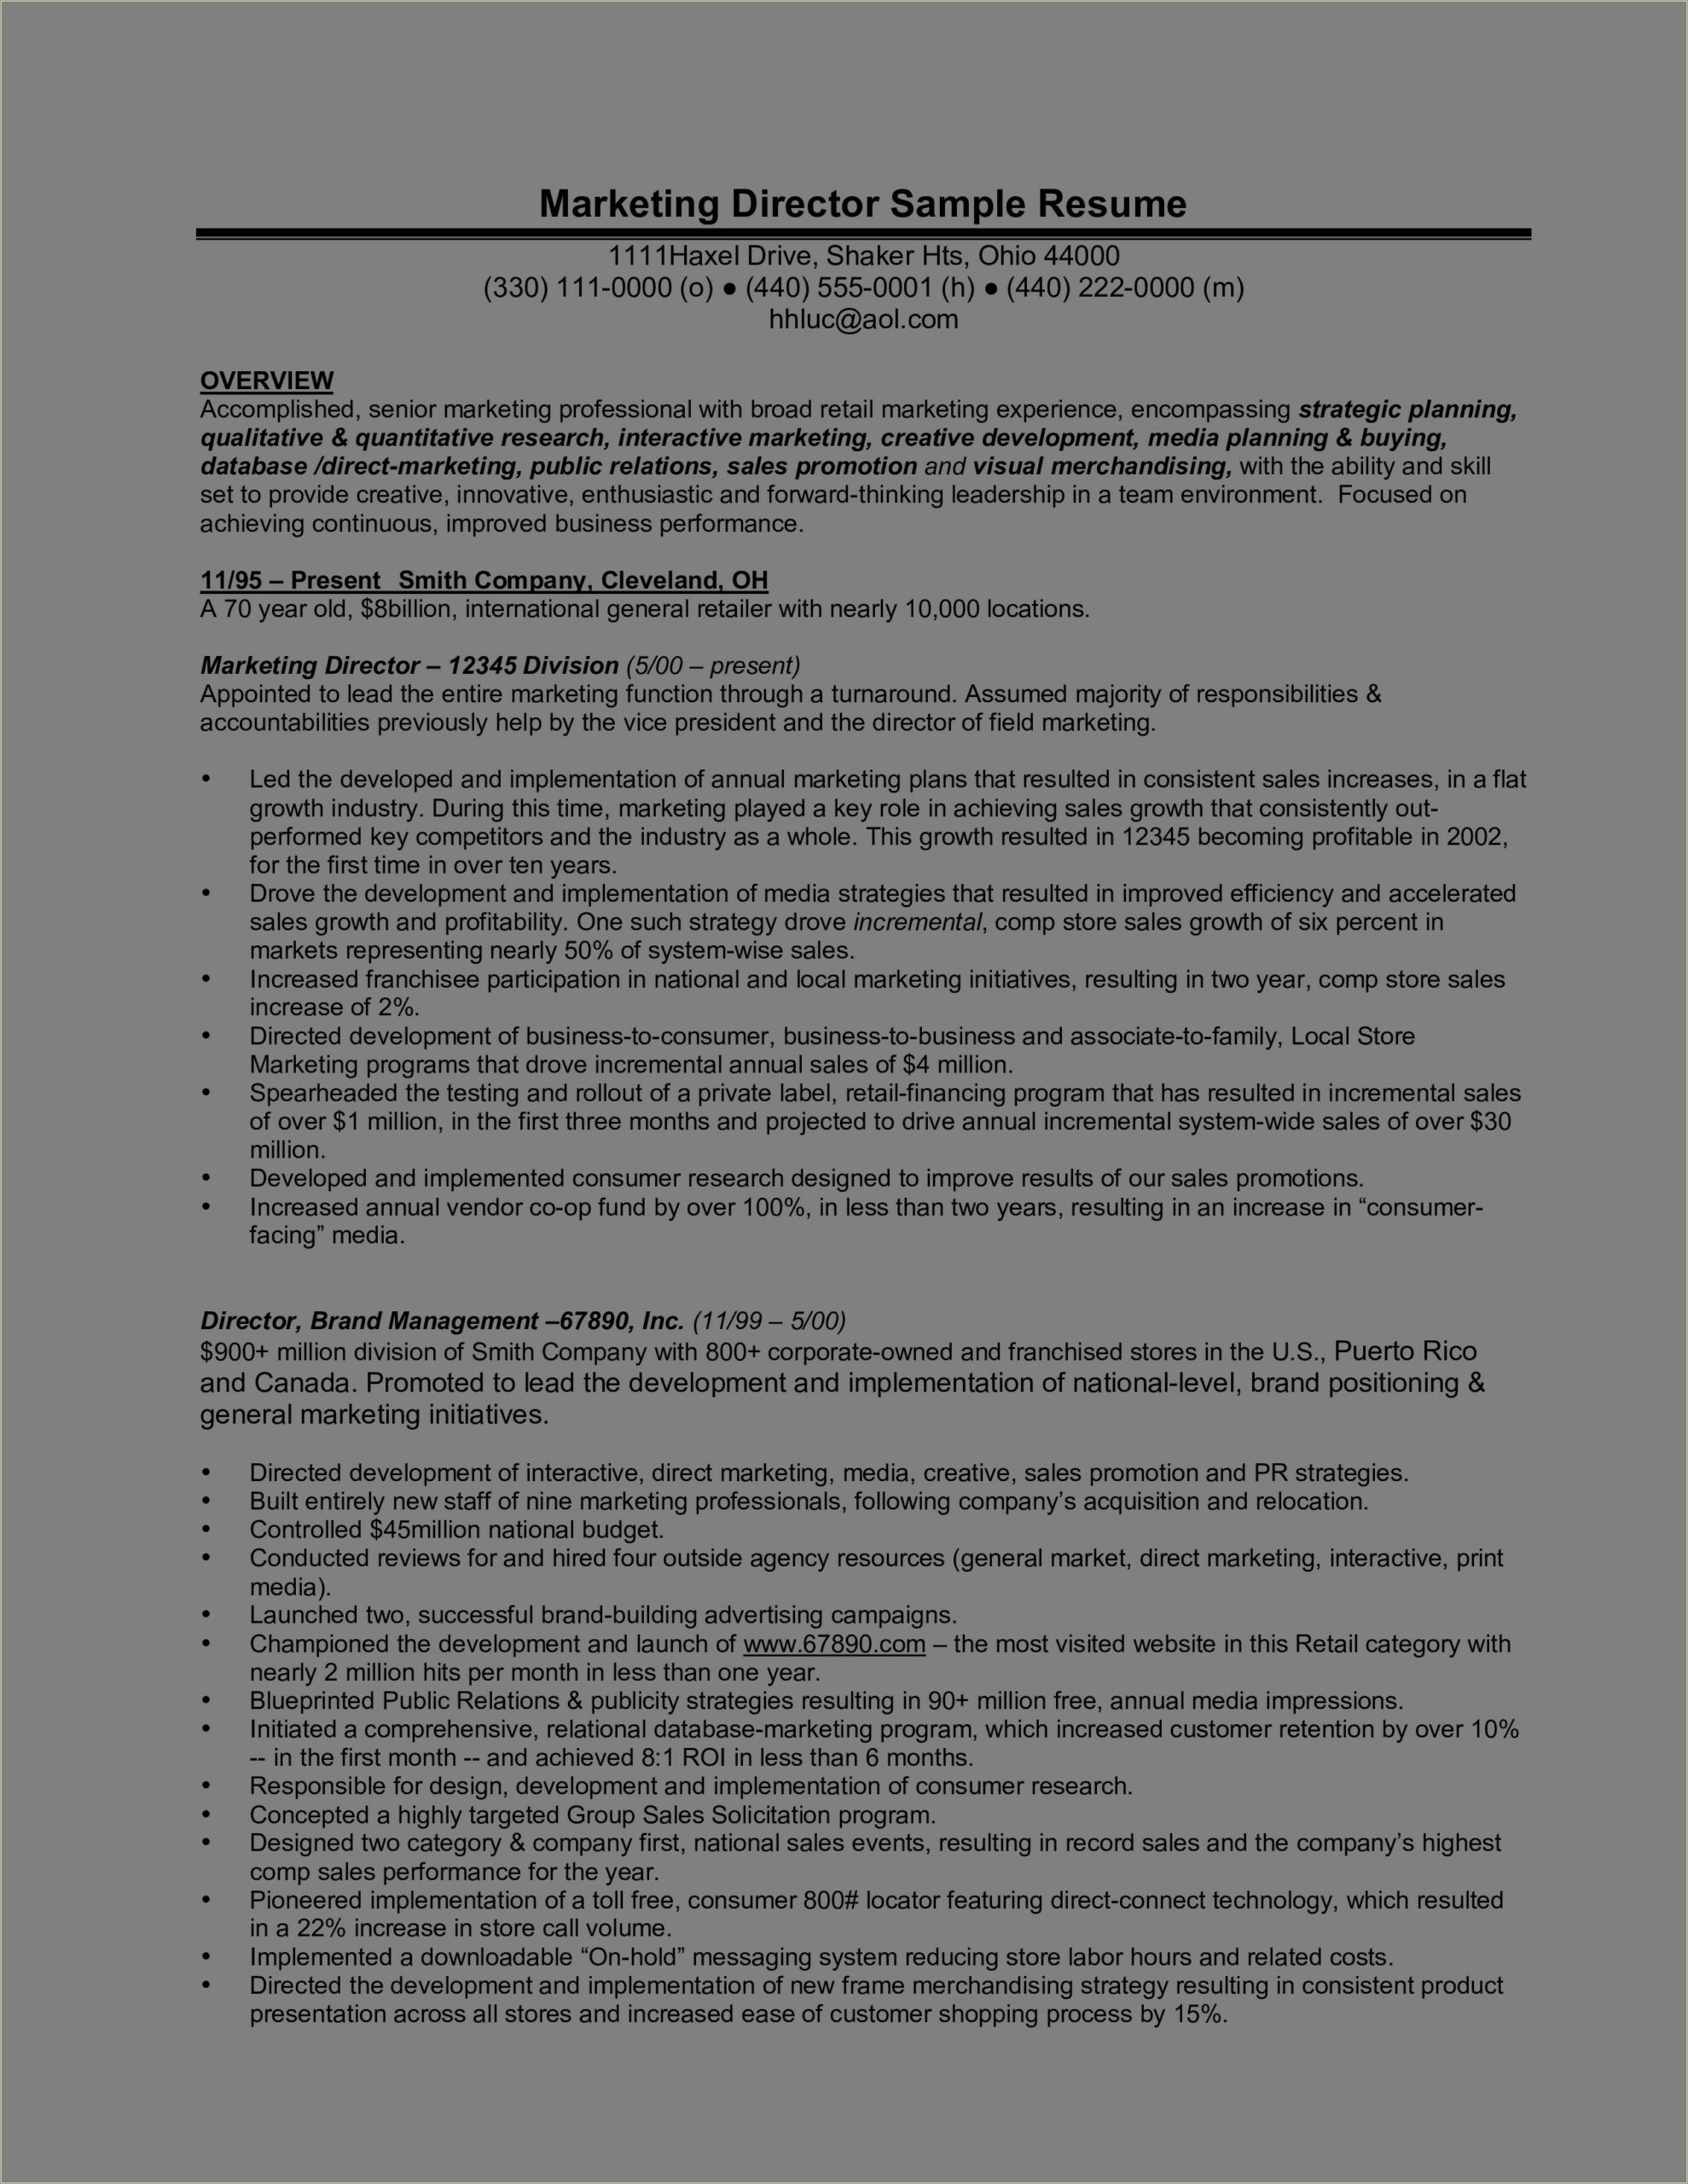 Sample Resume Format For Experienced Marketing Professional